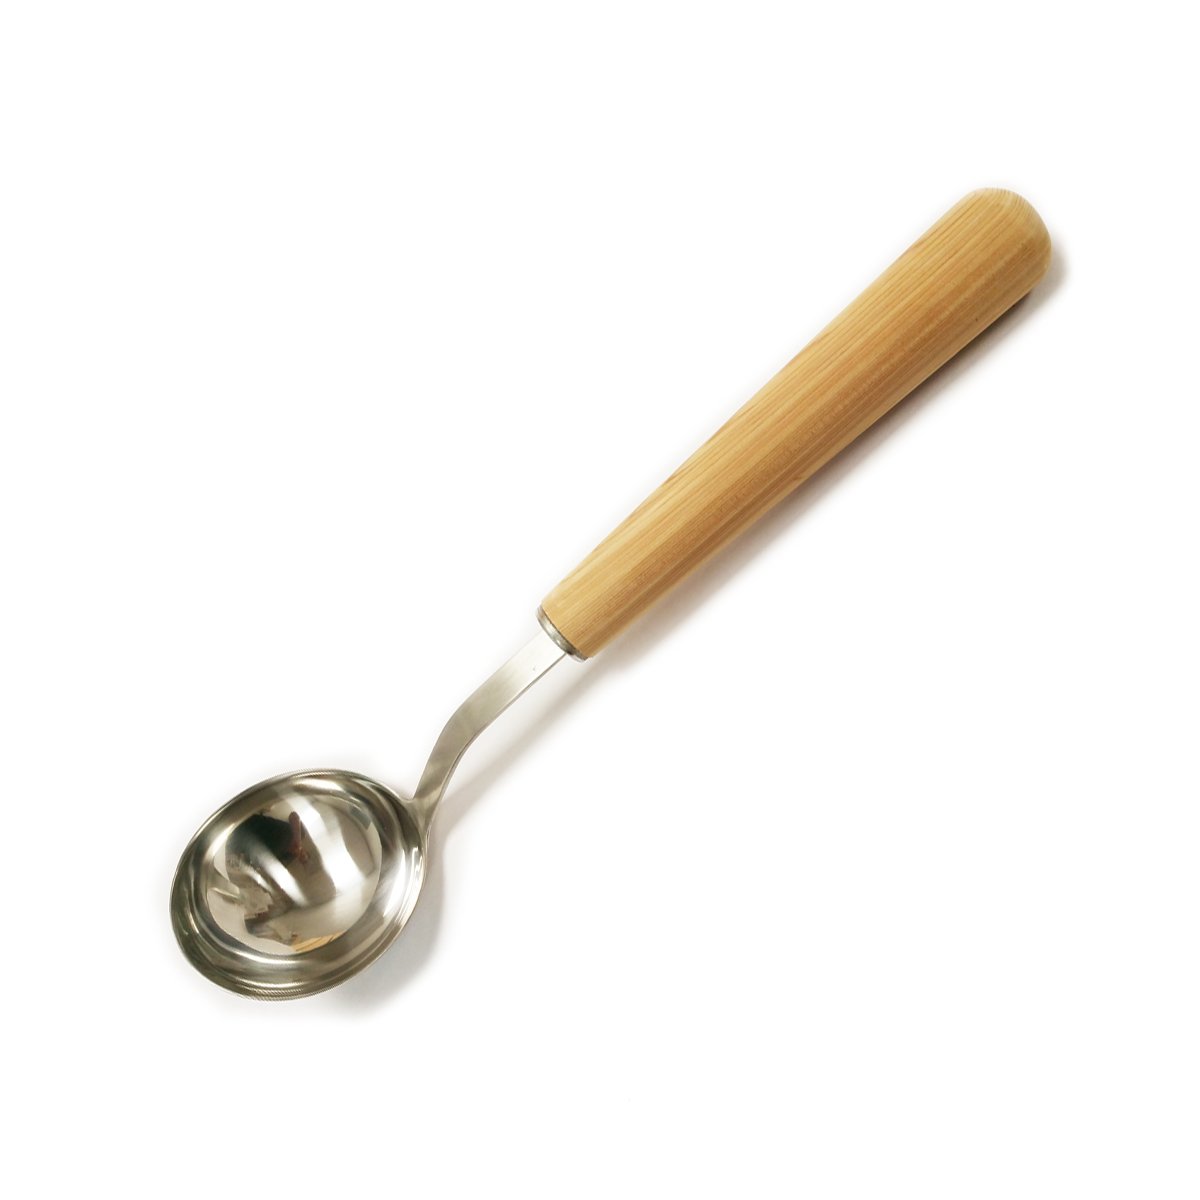 Stainless Steel Dipper (Big Cup) with Cedar Handle (15 3/4″)